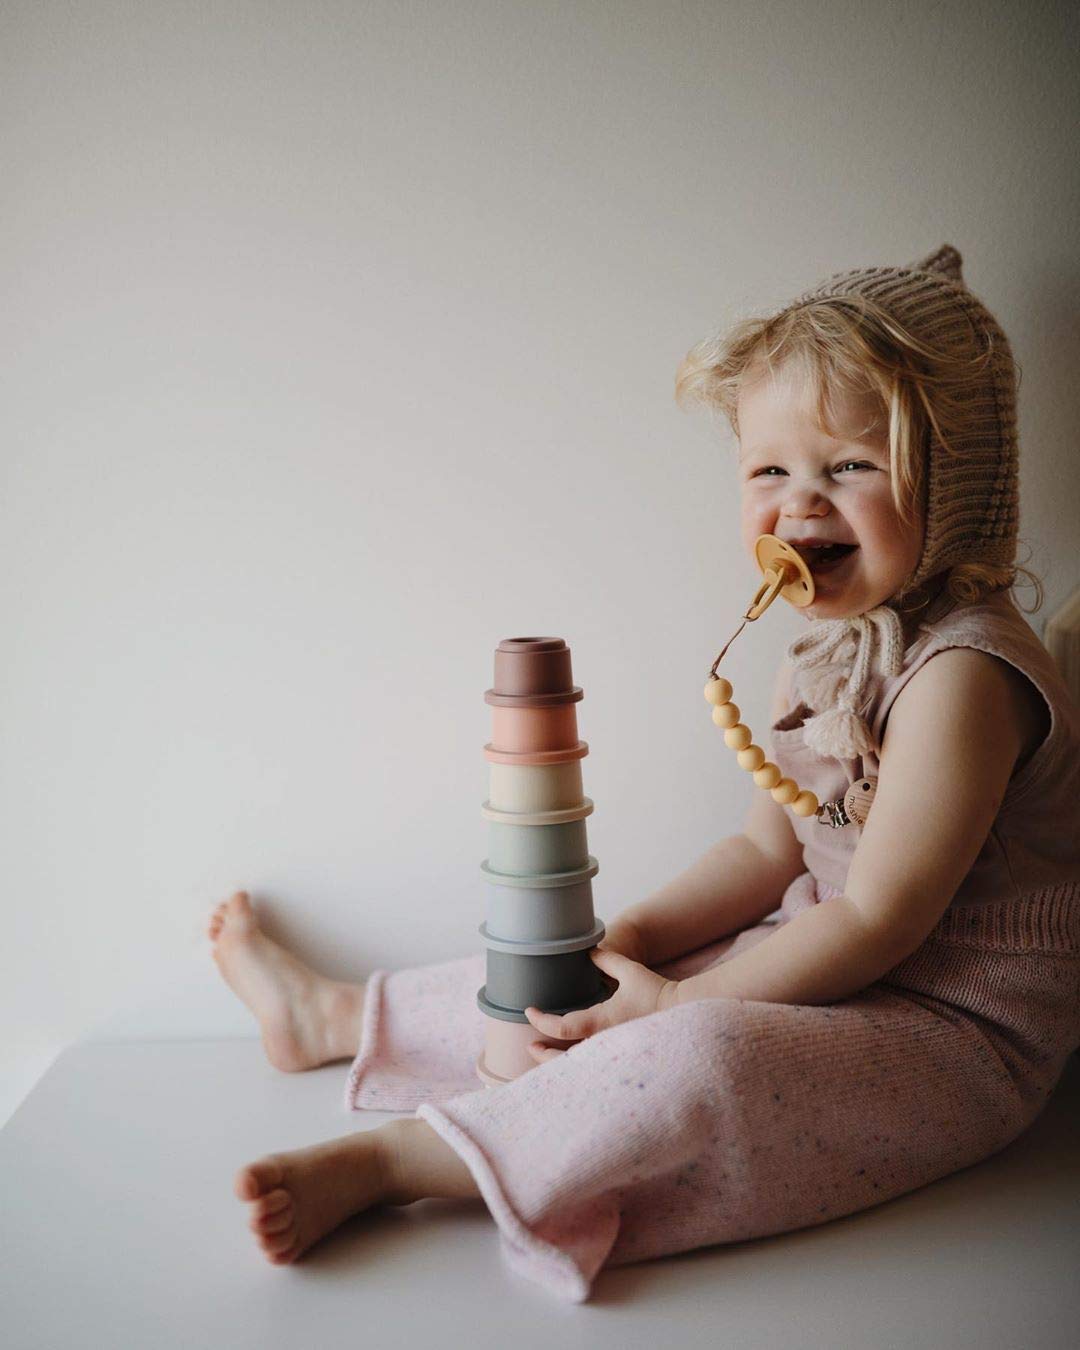 mushie Stacking Cups Toy | Made in Denmark (Original)